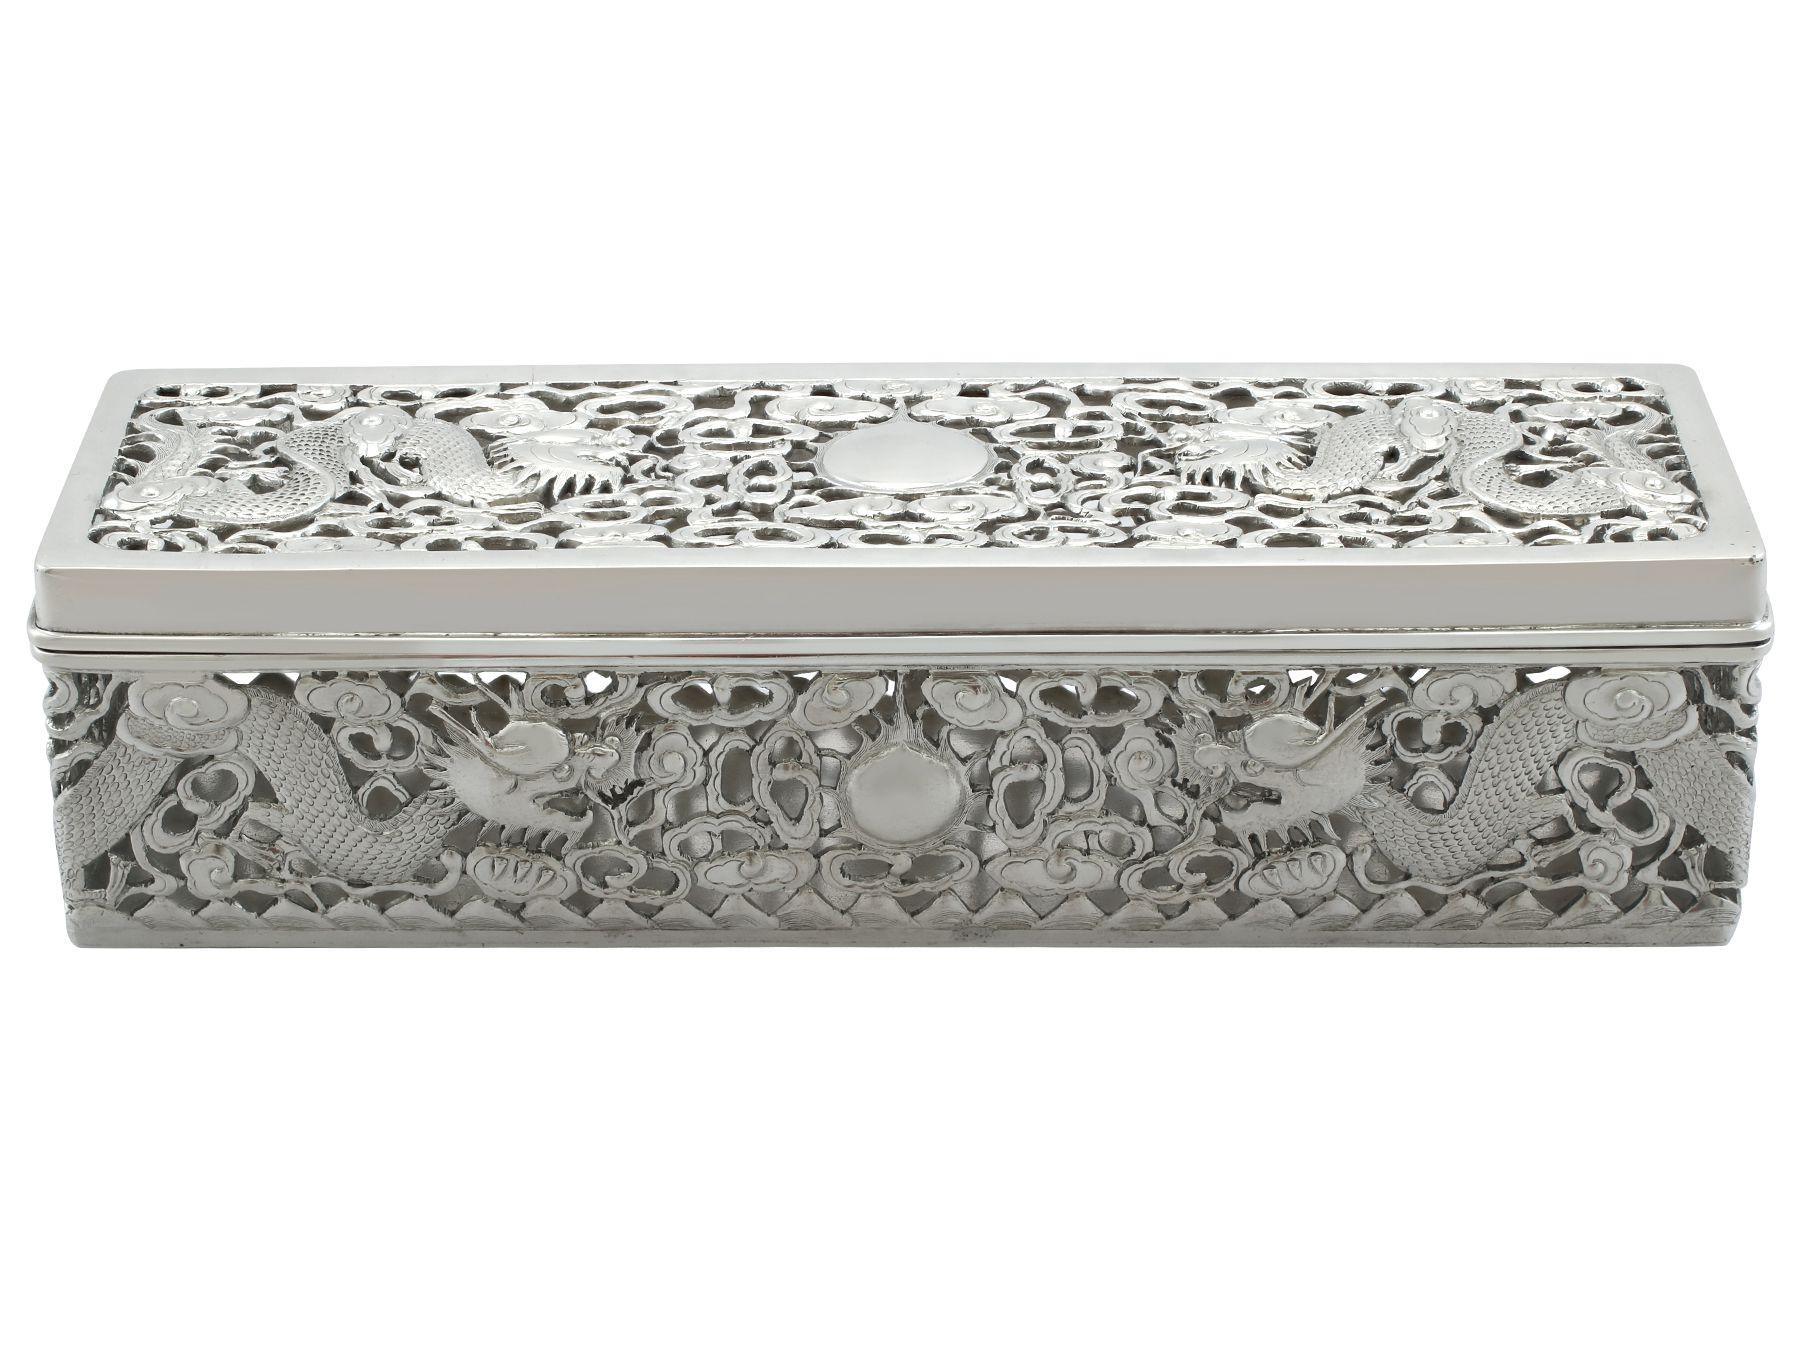 An exceptional, fine and impressive antique Chinese Export silver box; an addition to our collection of boxes and cases.

This exceptional antique Chinese Export Silver (CES) box has a rectangular form.

Each elongated side of the box is